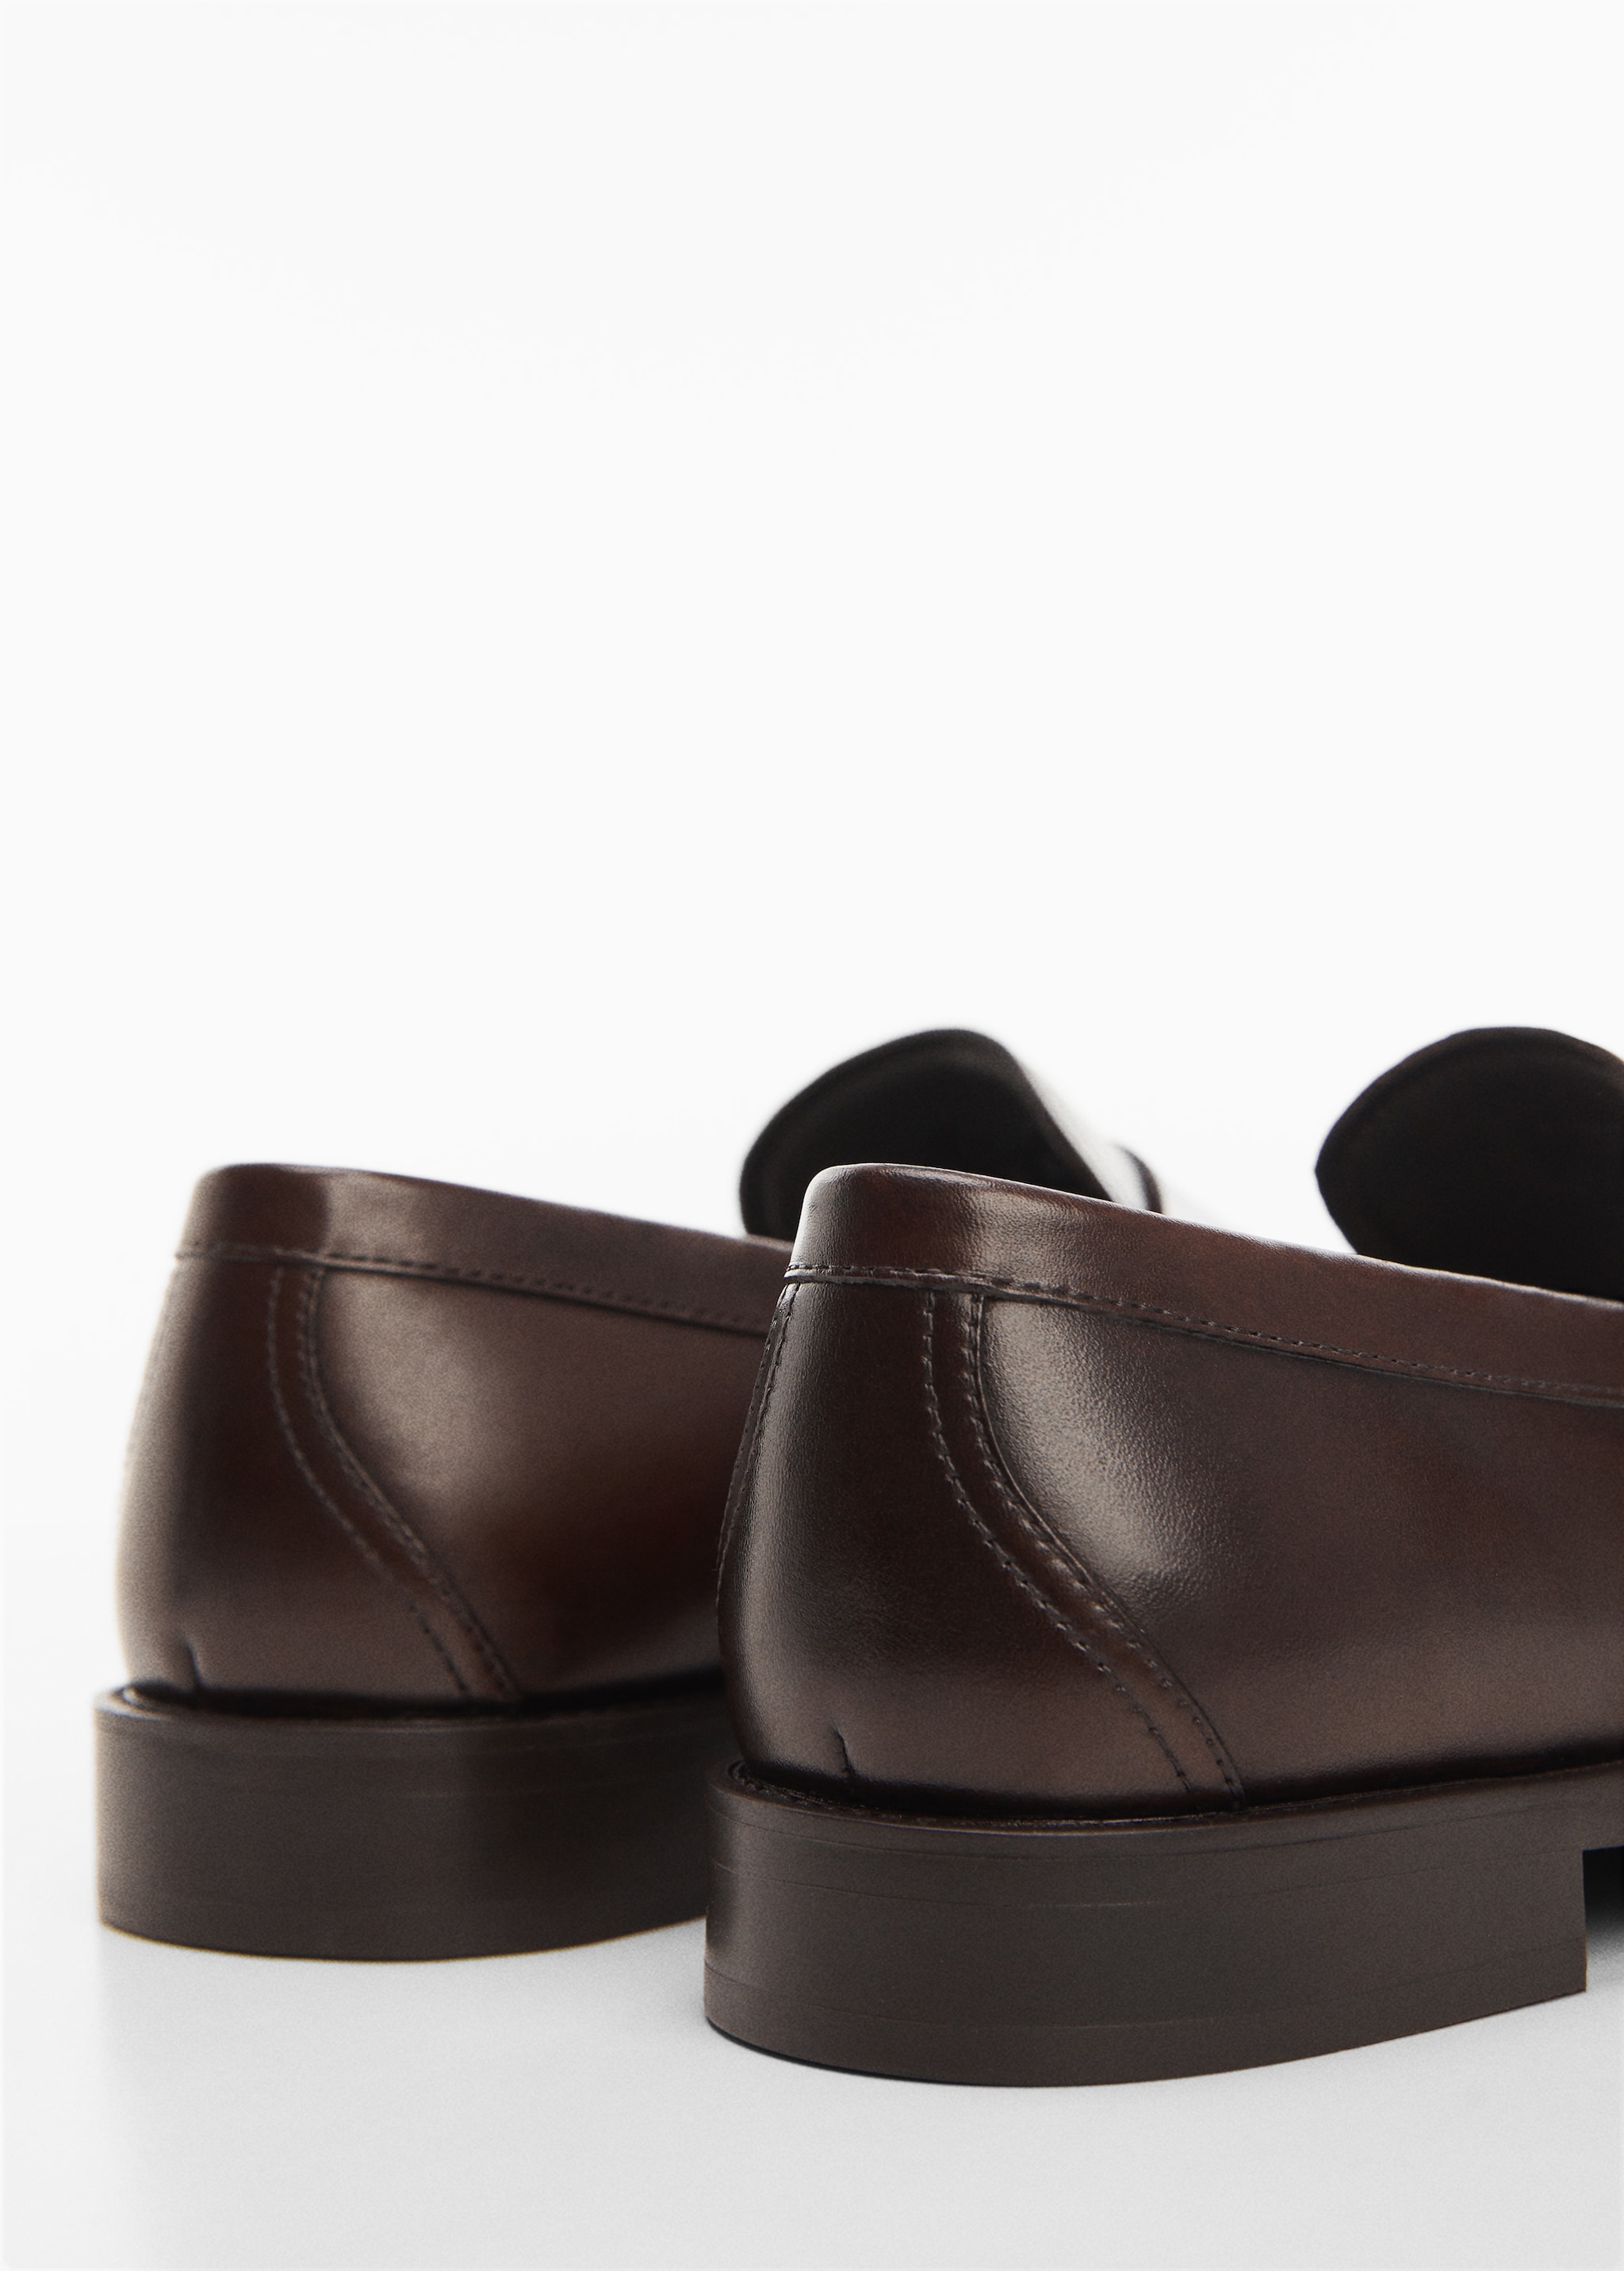 Aged-leather loafers - Details of the article 2